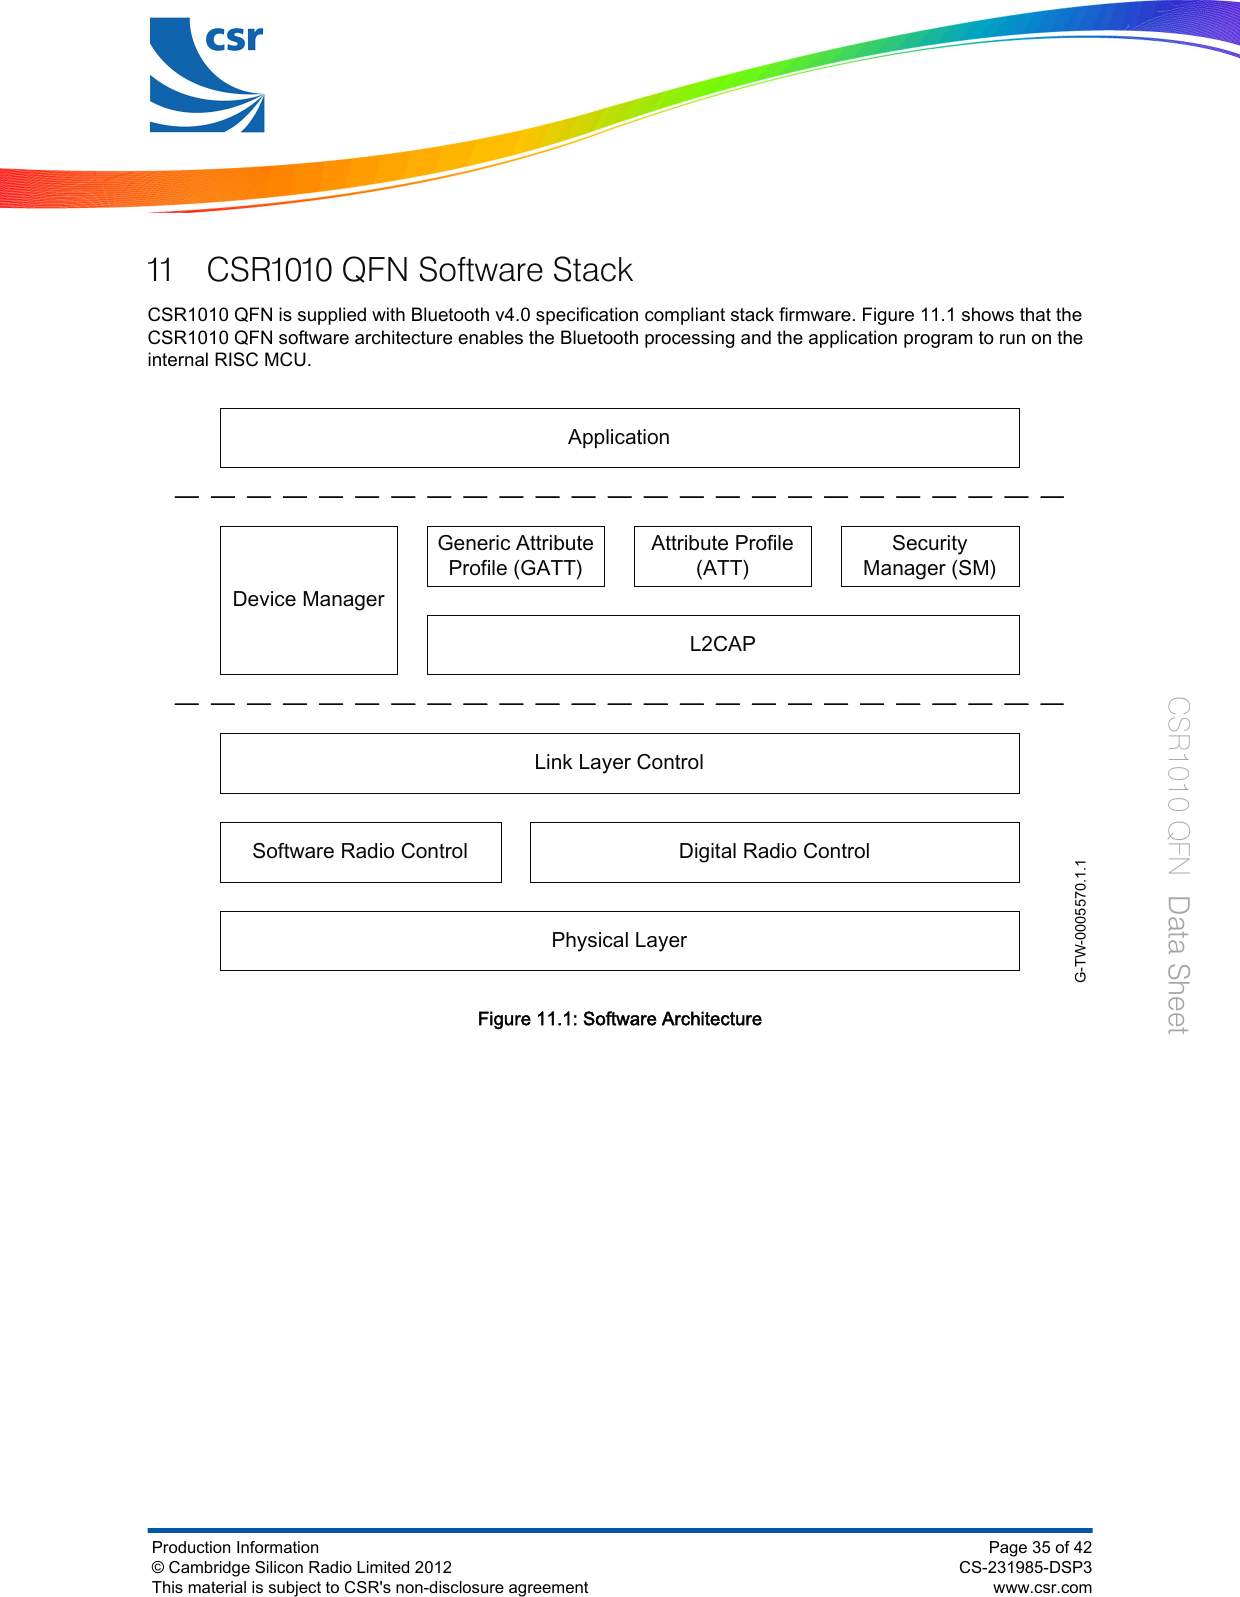 11 CSR1010 QFN Software StackCSR1010 QFN is supplied with Bluetooth v4.0 specification compliant stack firmware. Figure 11.1 shows that theCSR1010 QFN software architecture enables the Bluetooth processing and the application program to run on theinternal RISC MCU.G-TW-0005570.1.1Device ManagerGeneric Attribute Profile (GATT)ApplicationSecurity Manager (SM)Attribute Profile (ATT)L2CAPLink Layer ControlDigital Radio ControlPhysical LayerSoftware Radio ControlFigure 11.1: Software ArchitectureProduction Information© Cambridge Silicon Radio Limited 2012This material is subject to CSR&apos;s non-disclosure agreementPage 35 of 42CS-231985-DSP3www.csr.comCSR1010 QFN  Data Sheet